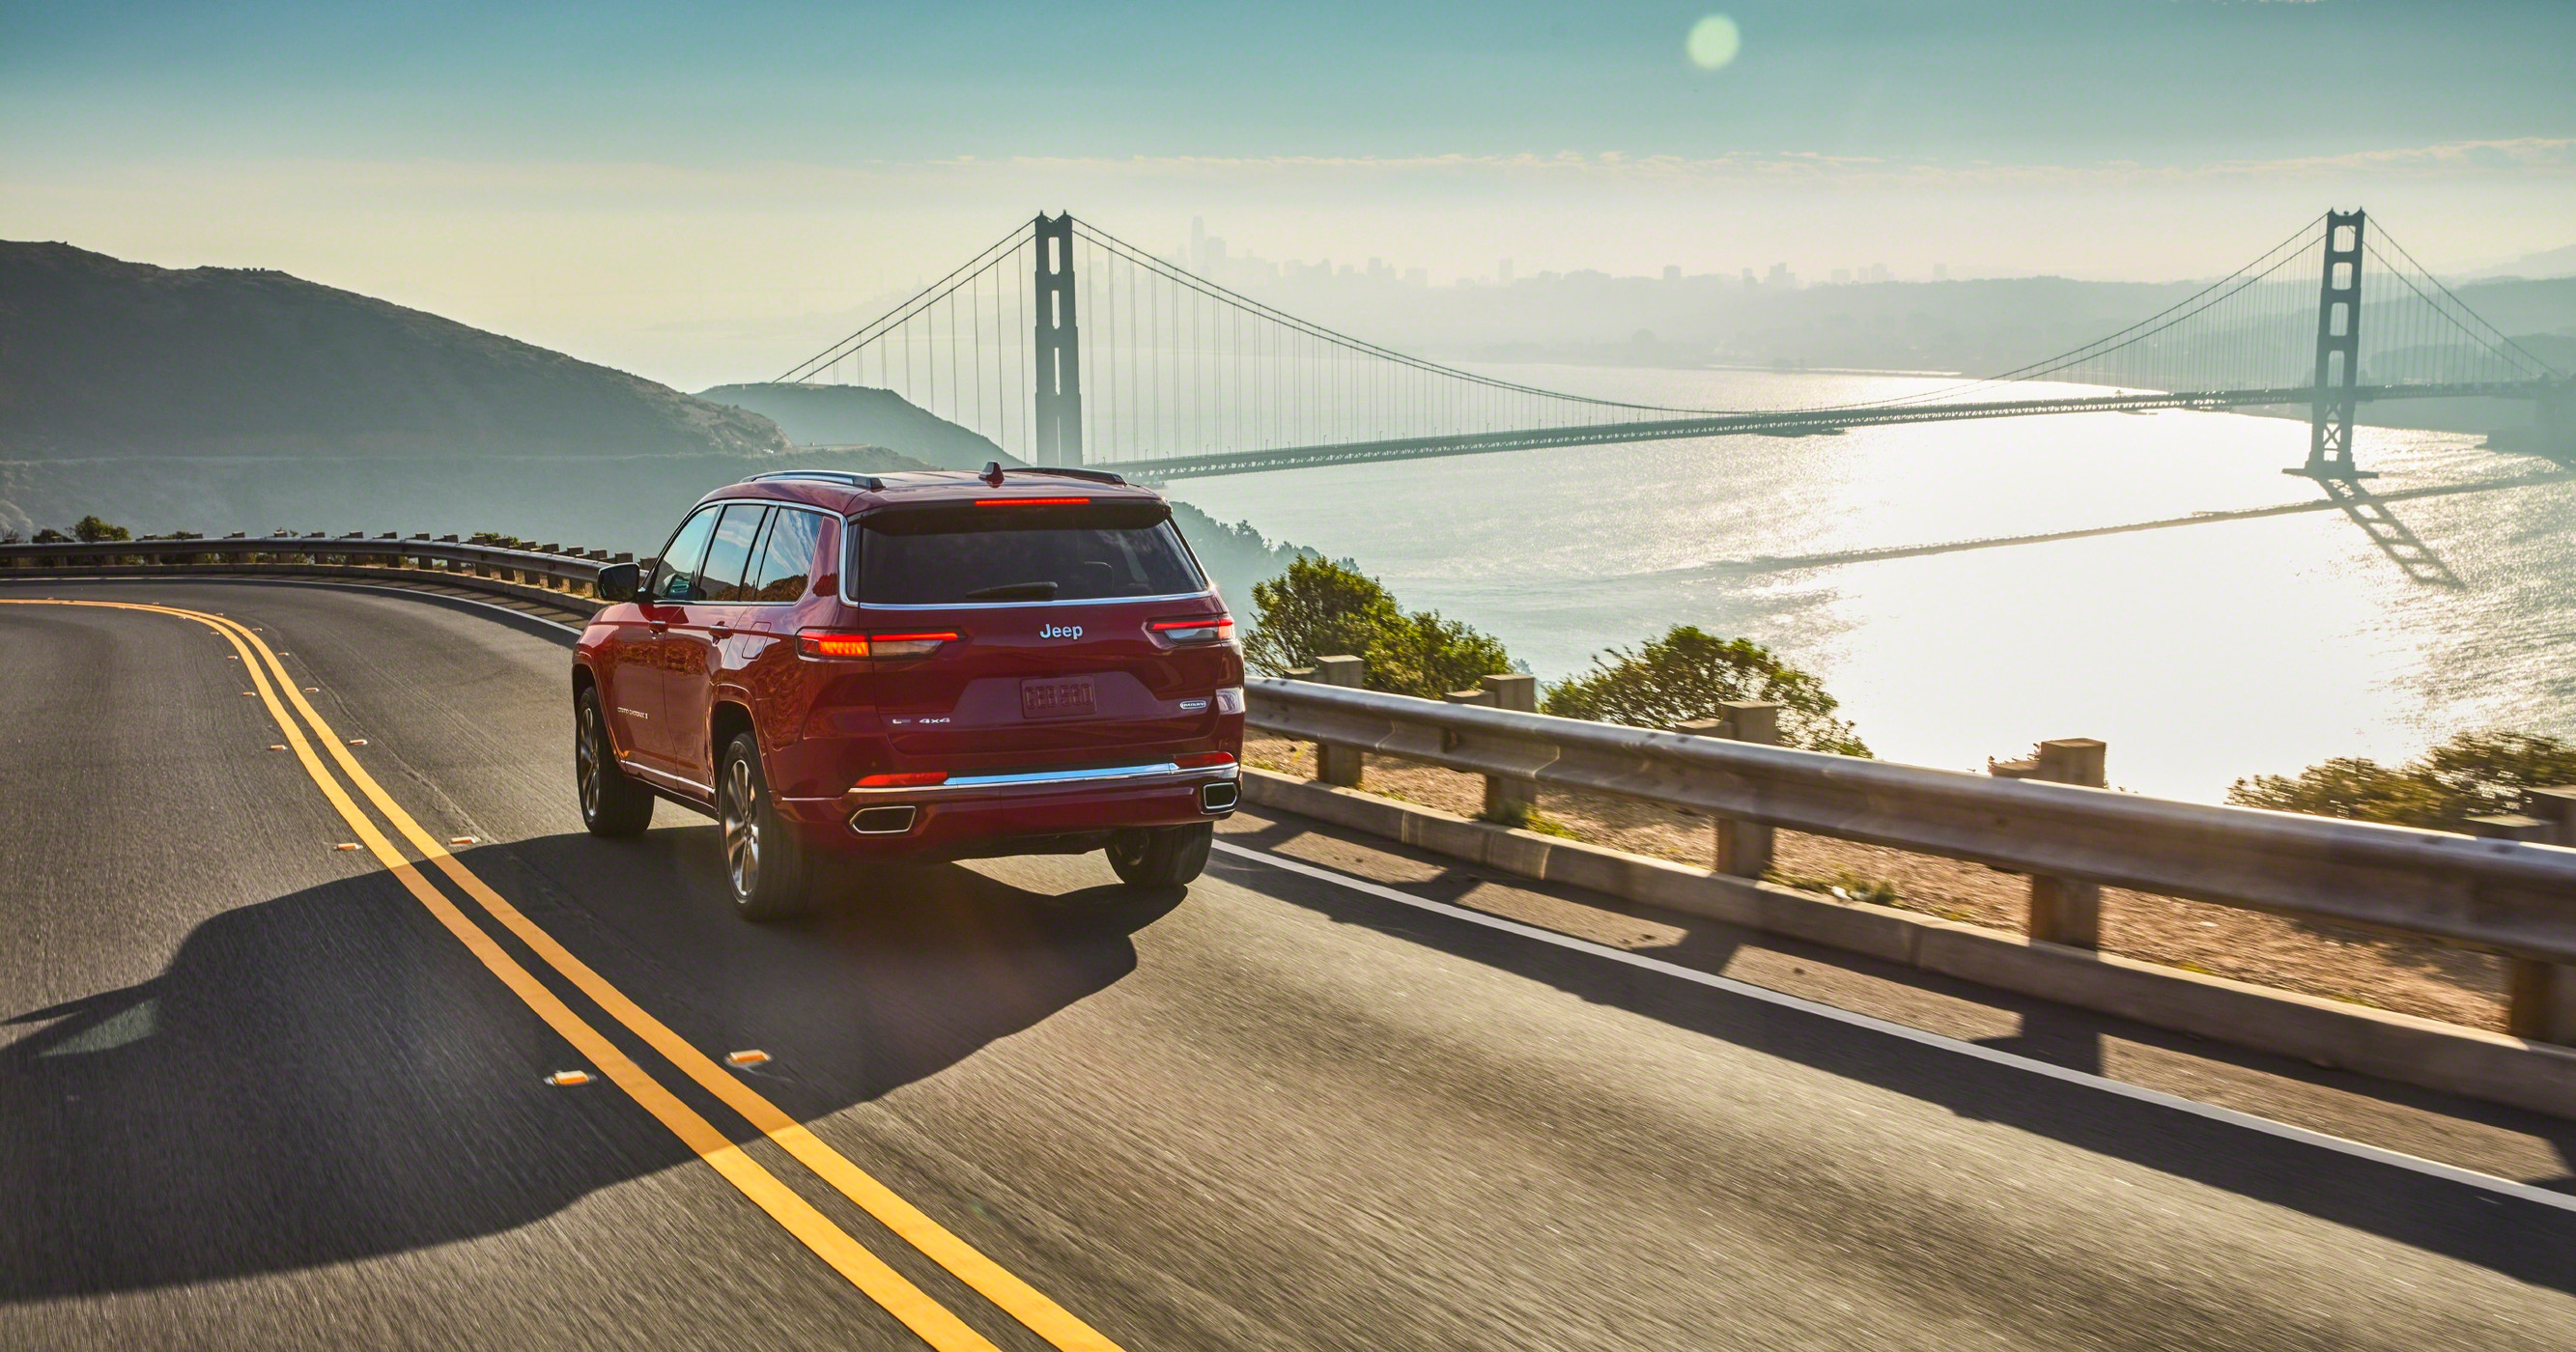 Rear view of a red Jeep driving with a view of the Golden Gate bridge up ahead.